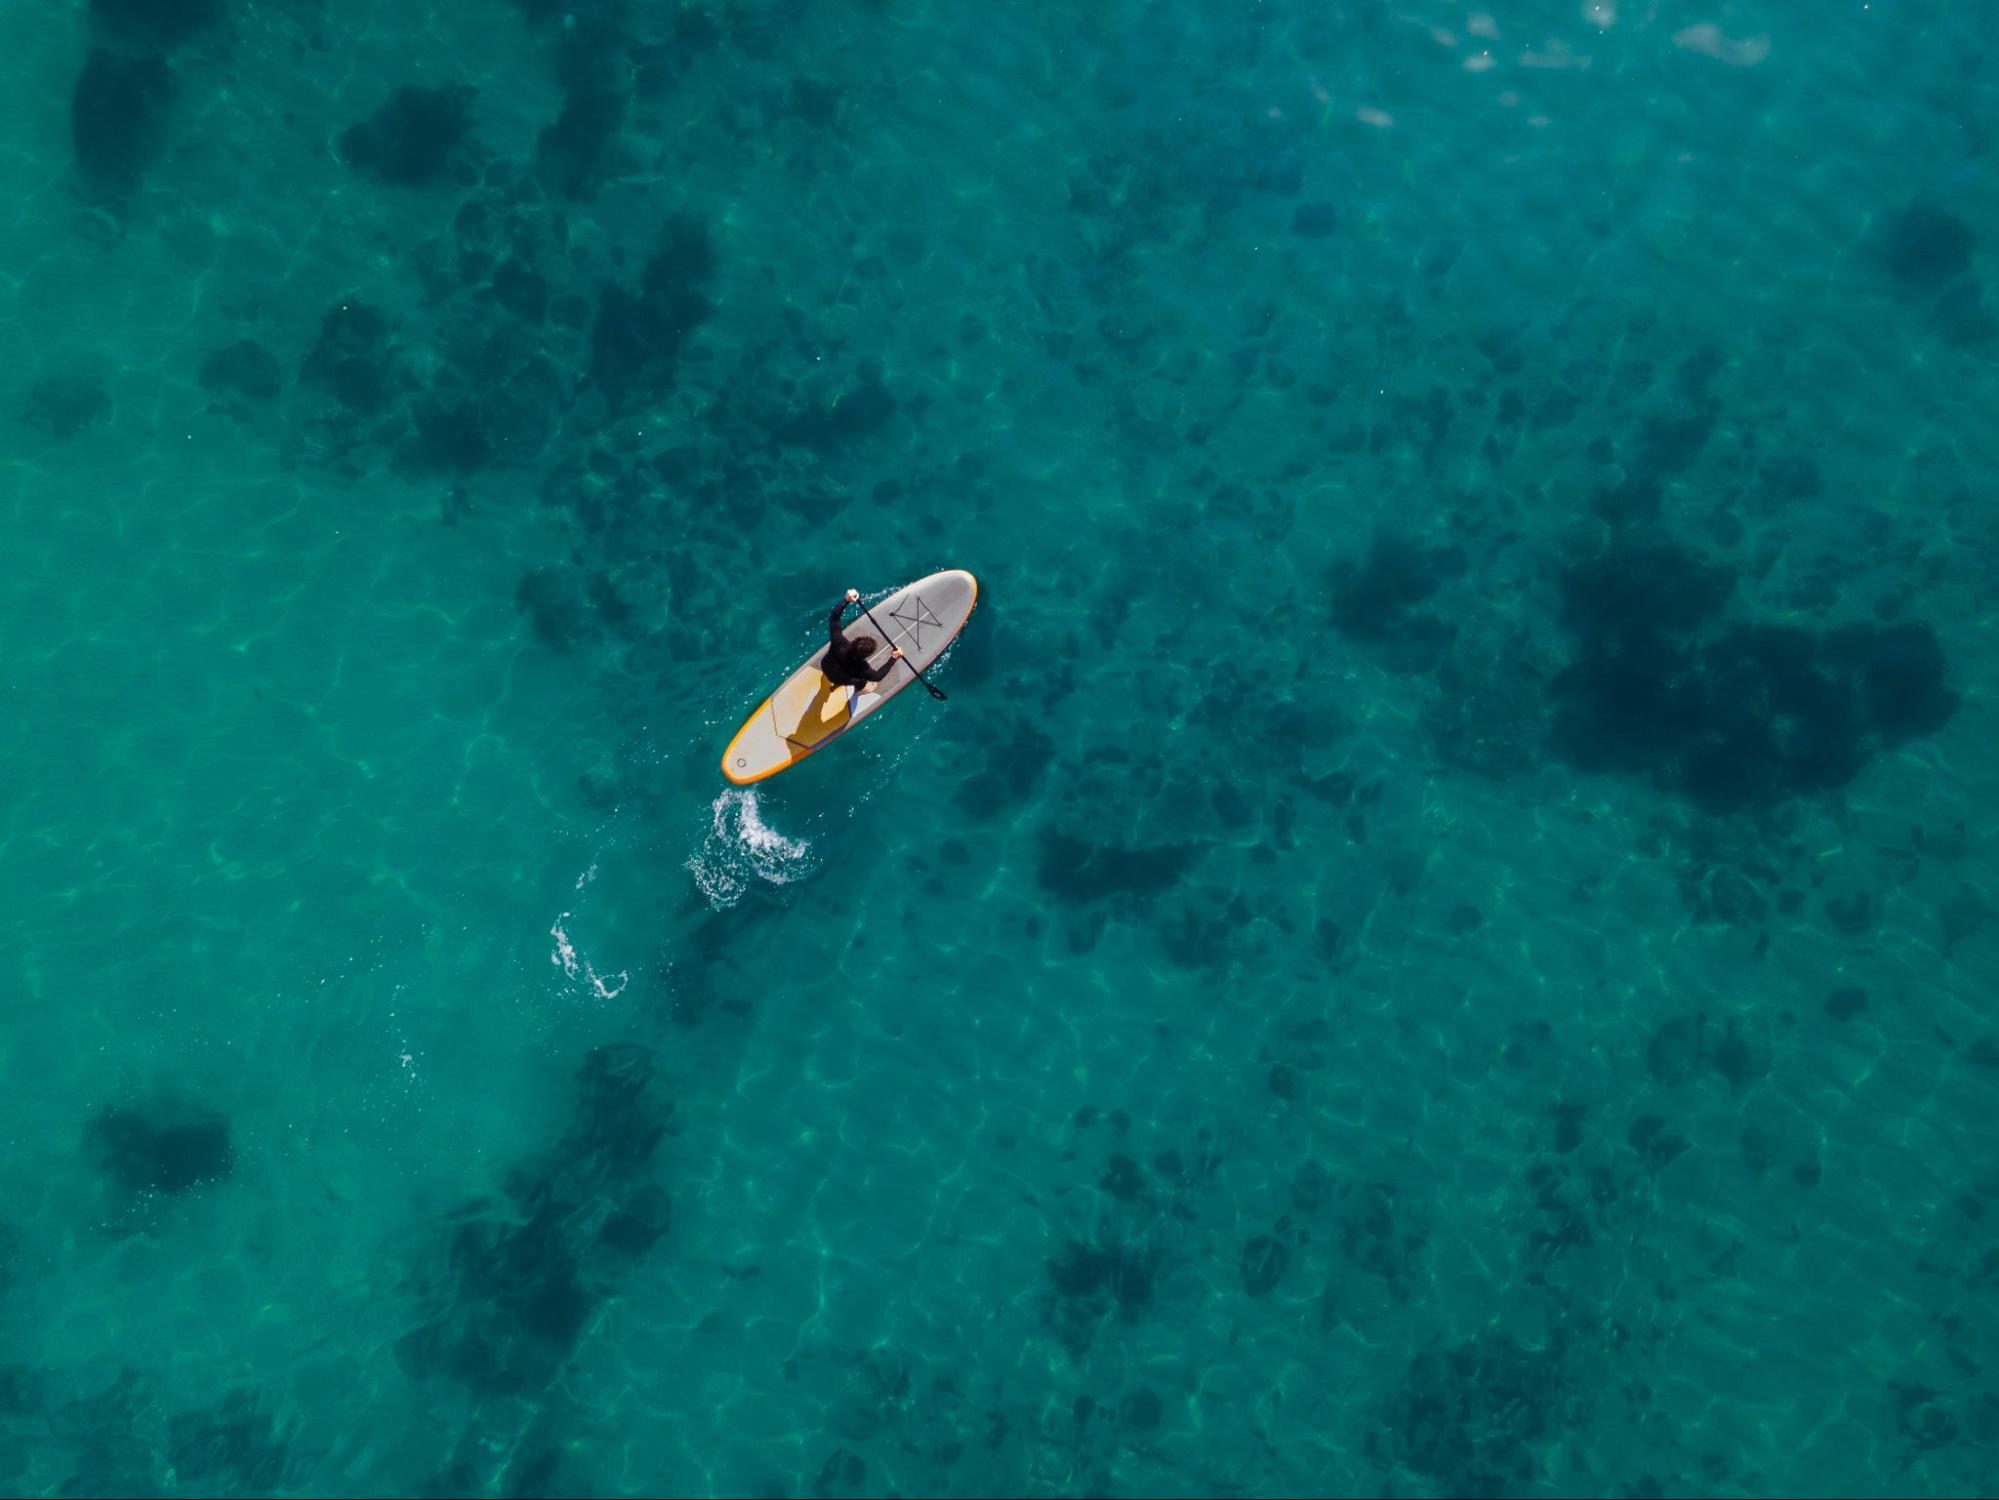 Sky View of a Person Paddling on a Board